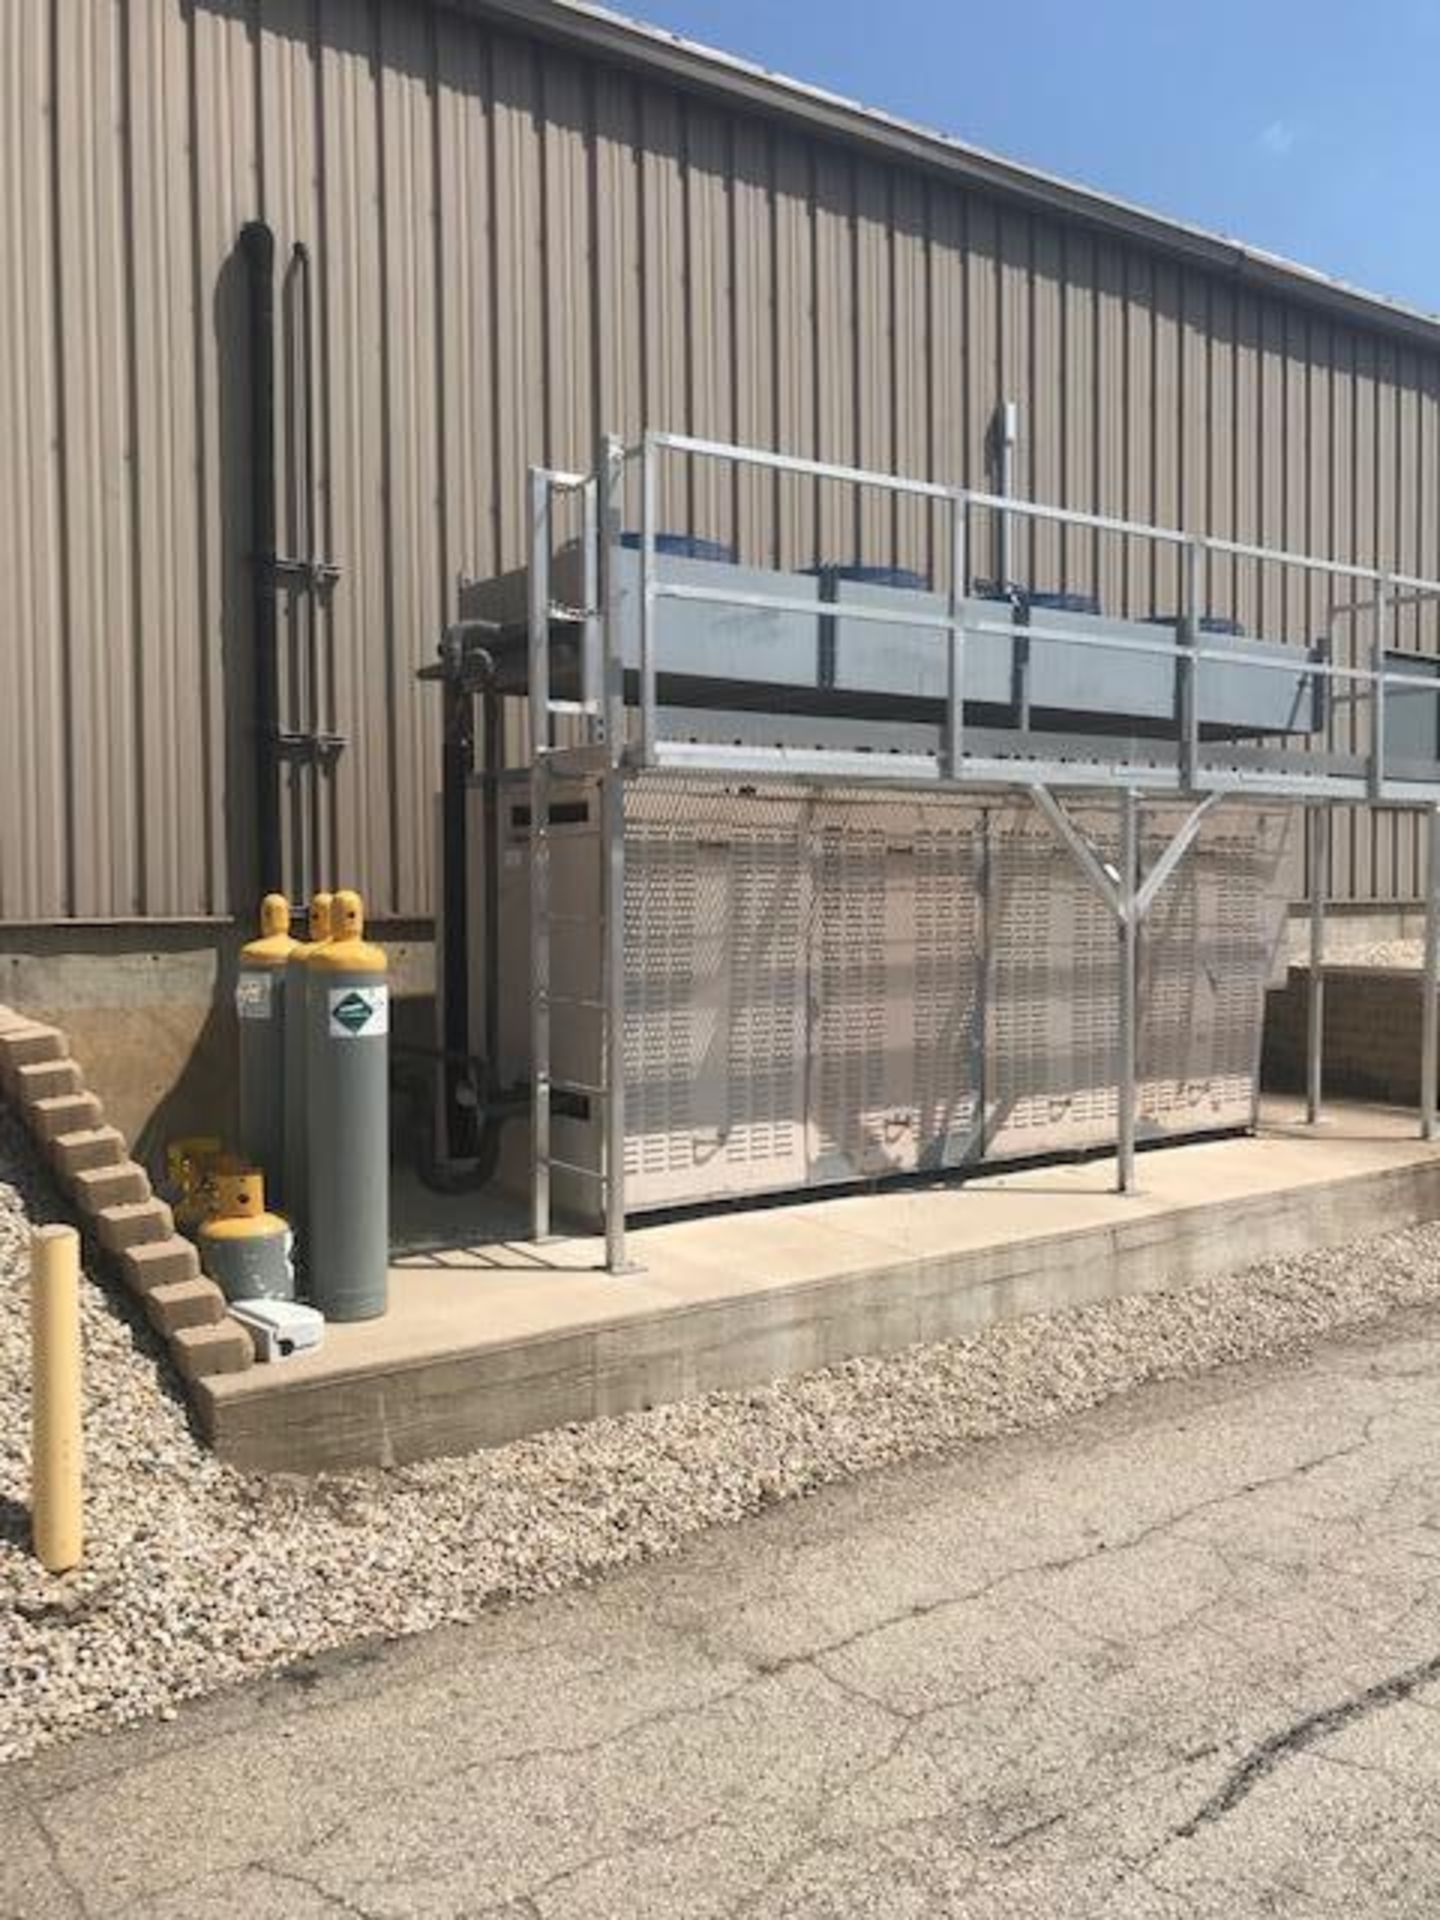 Cold zone self contained freon compressor {Located in Abrams, WI} - Image 6 of 8